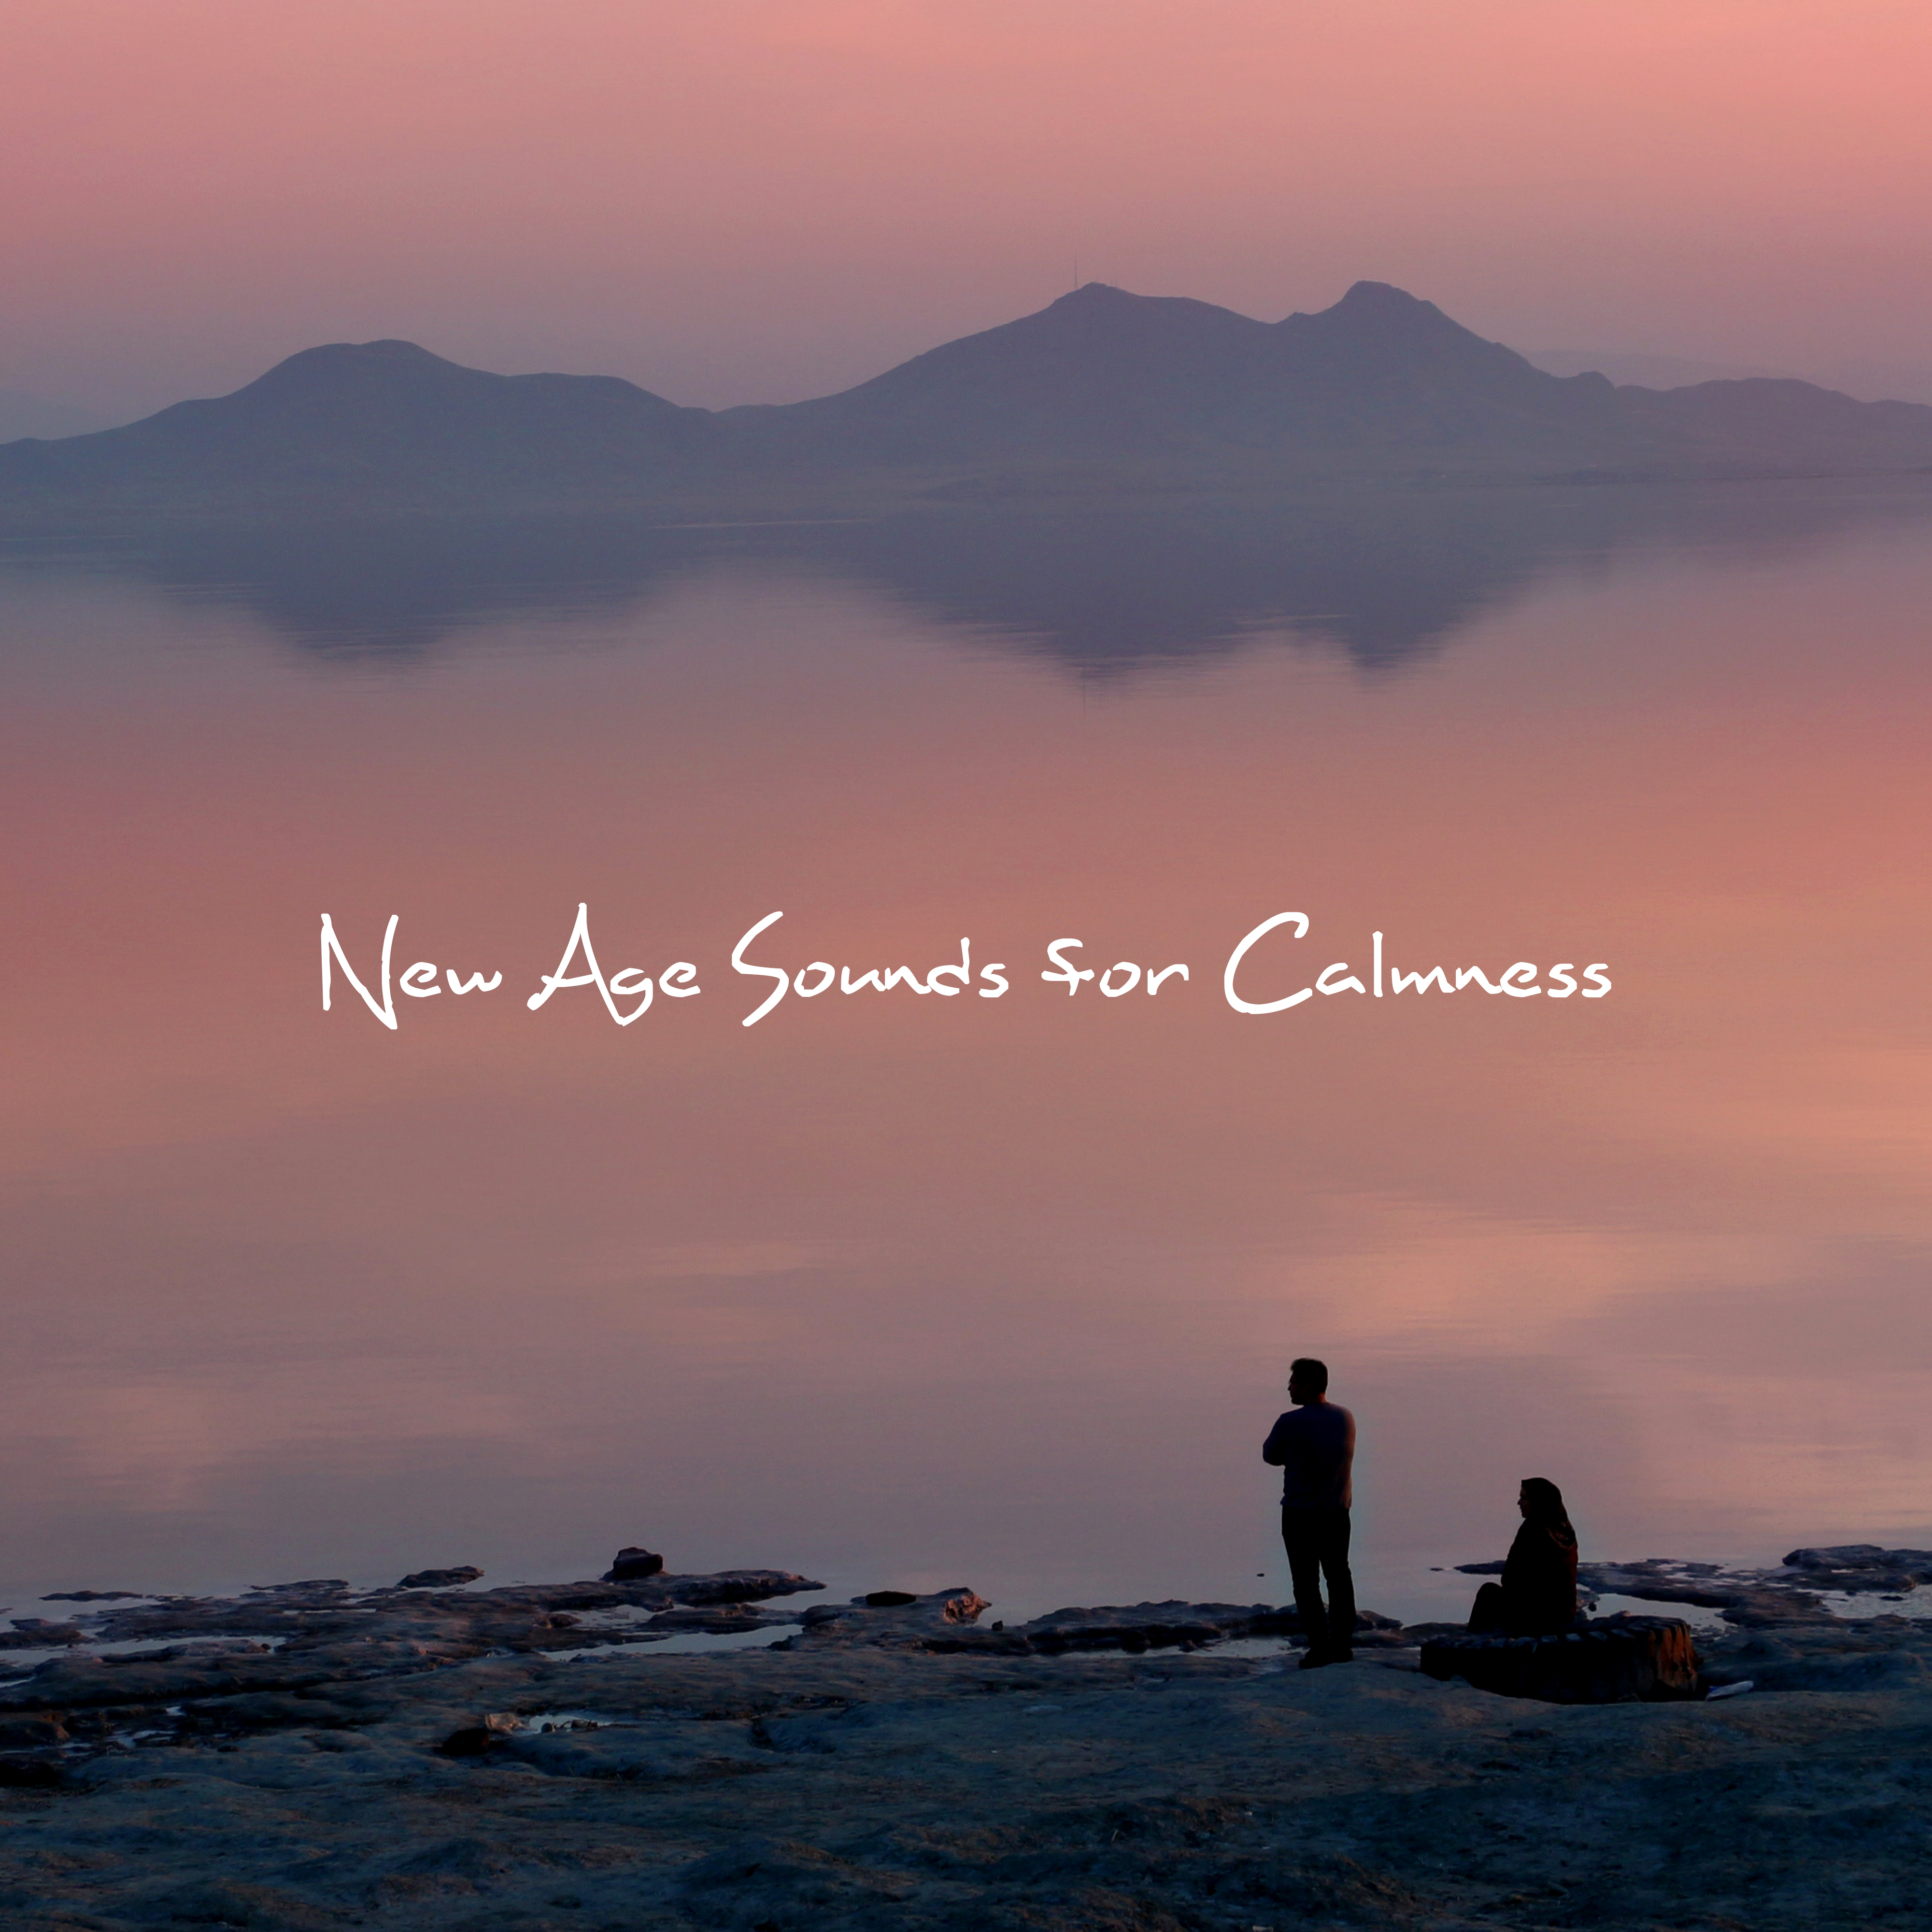 New Age Sounds for Calmness